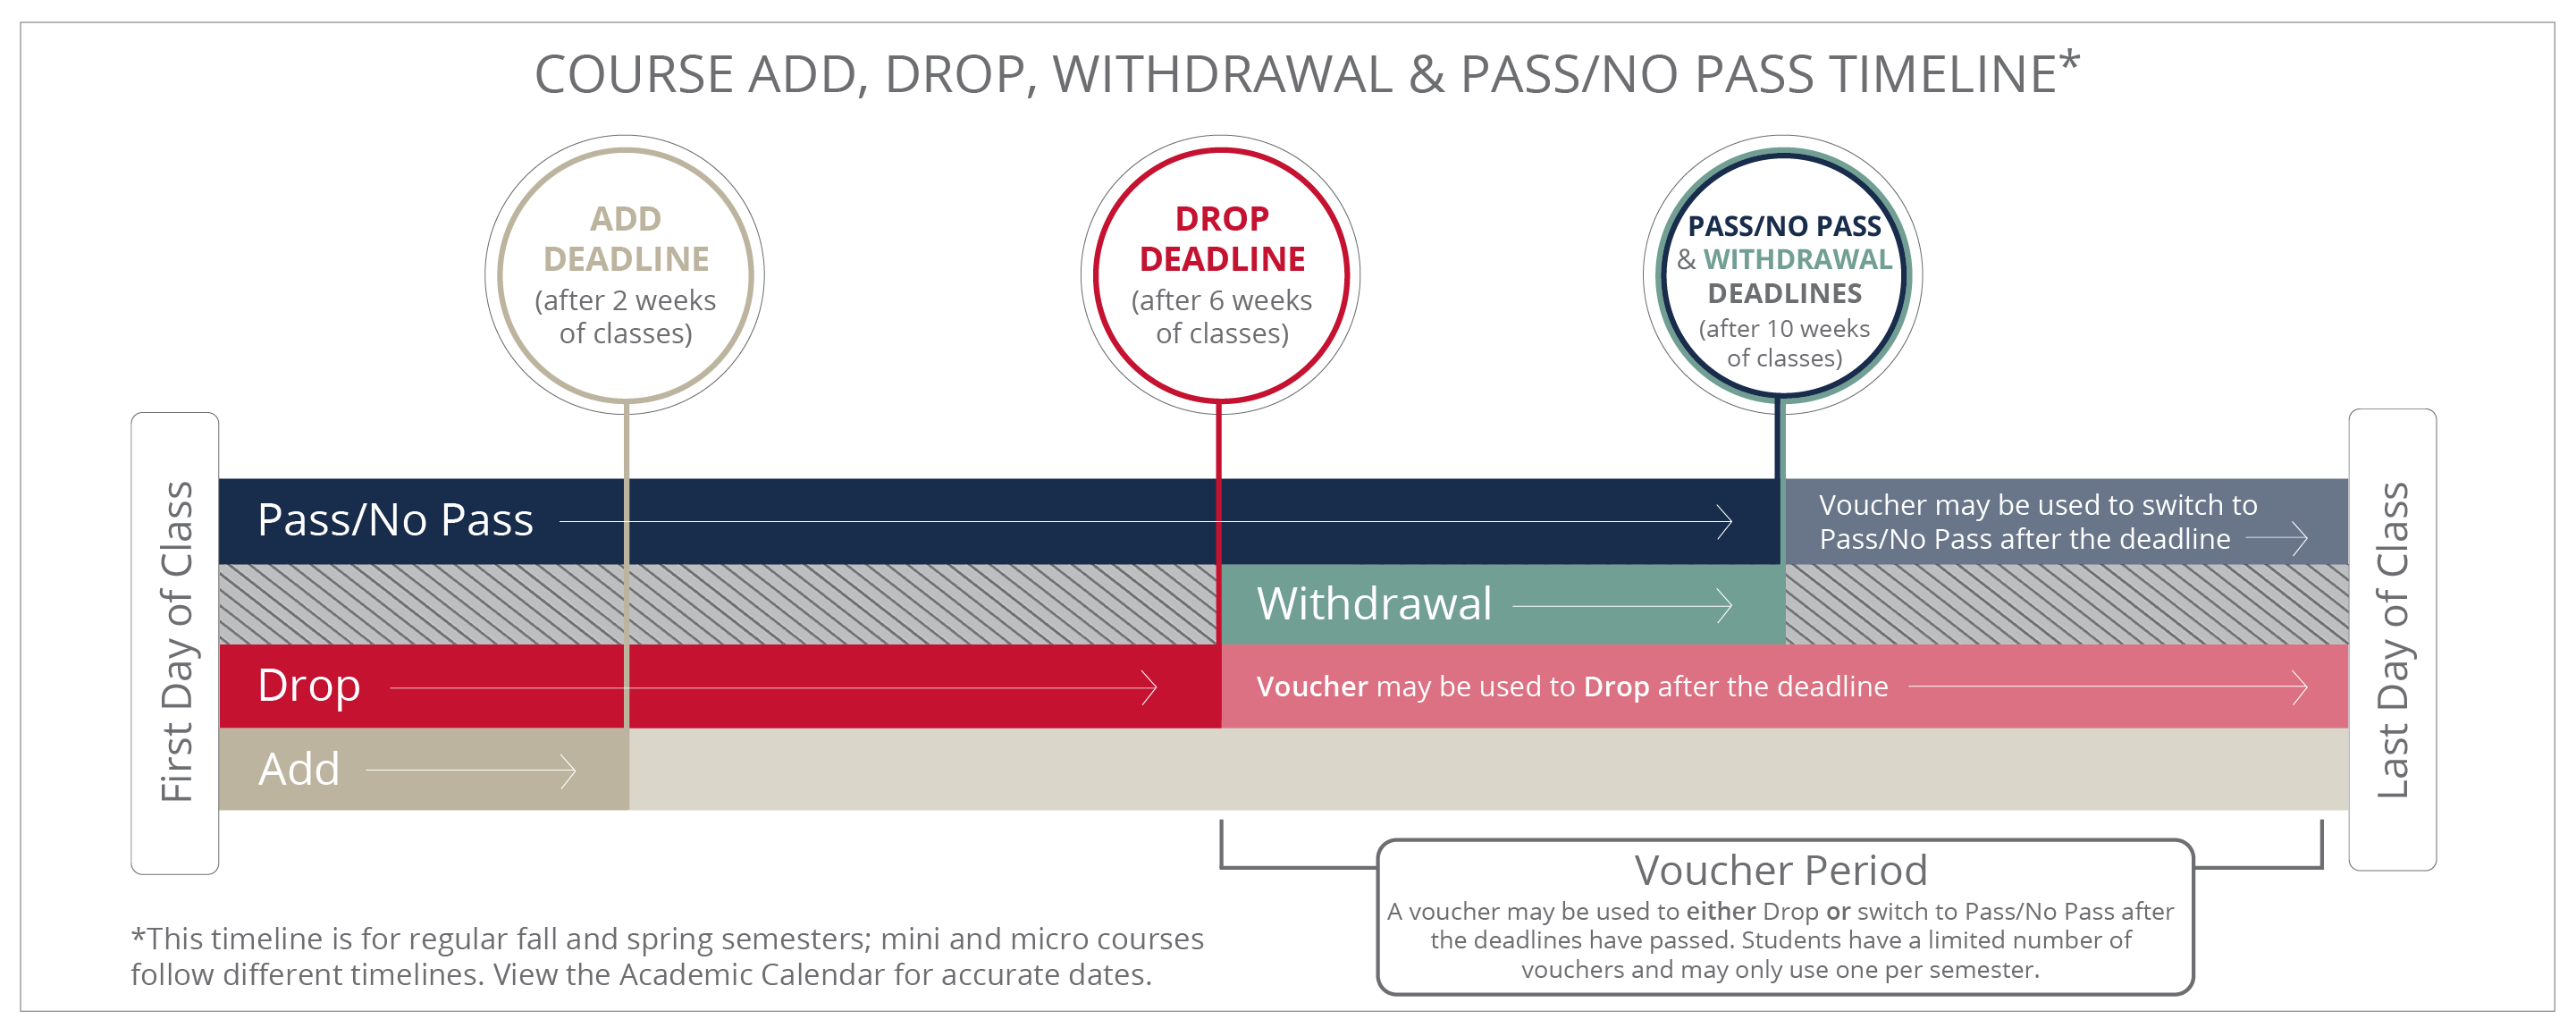 Graphic depicting add, drop, withdrawal, pass/no pass timeline